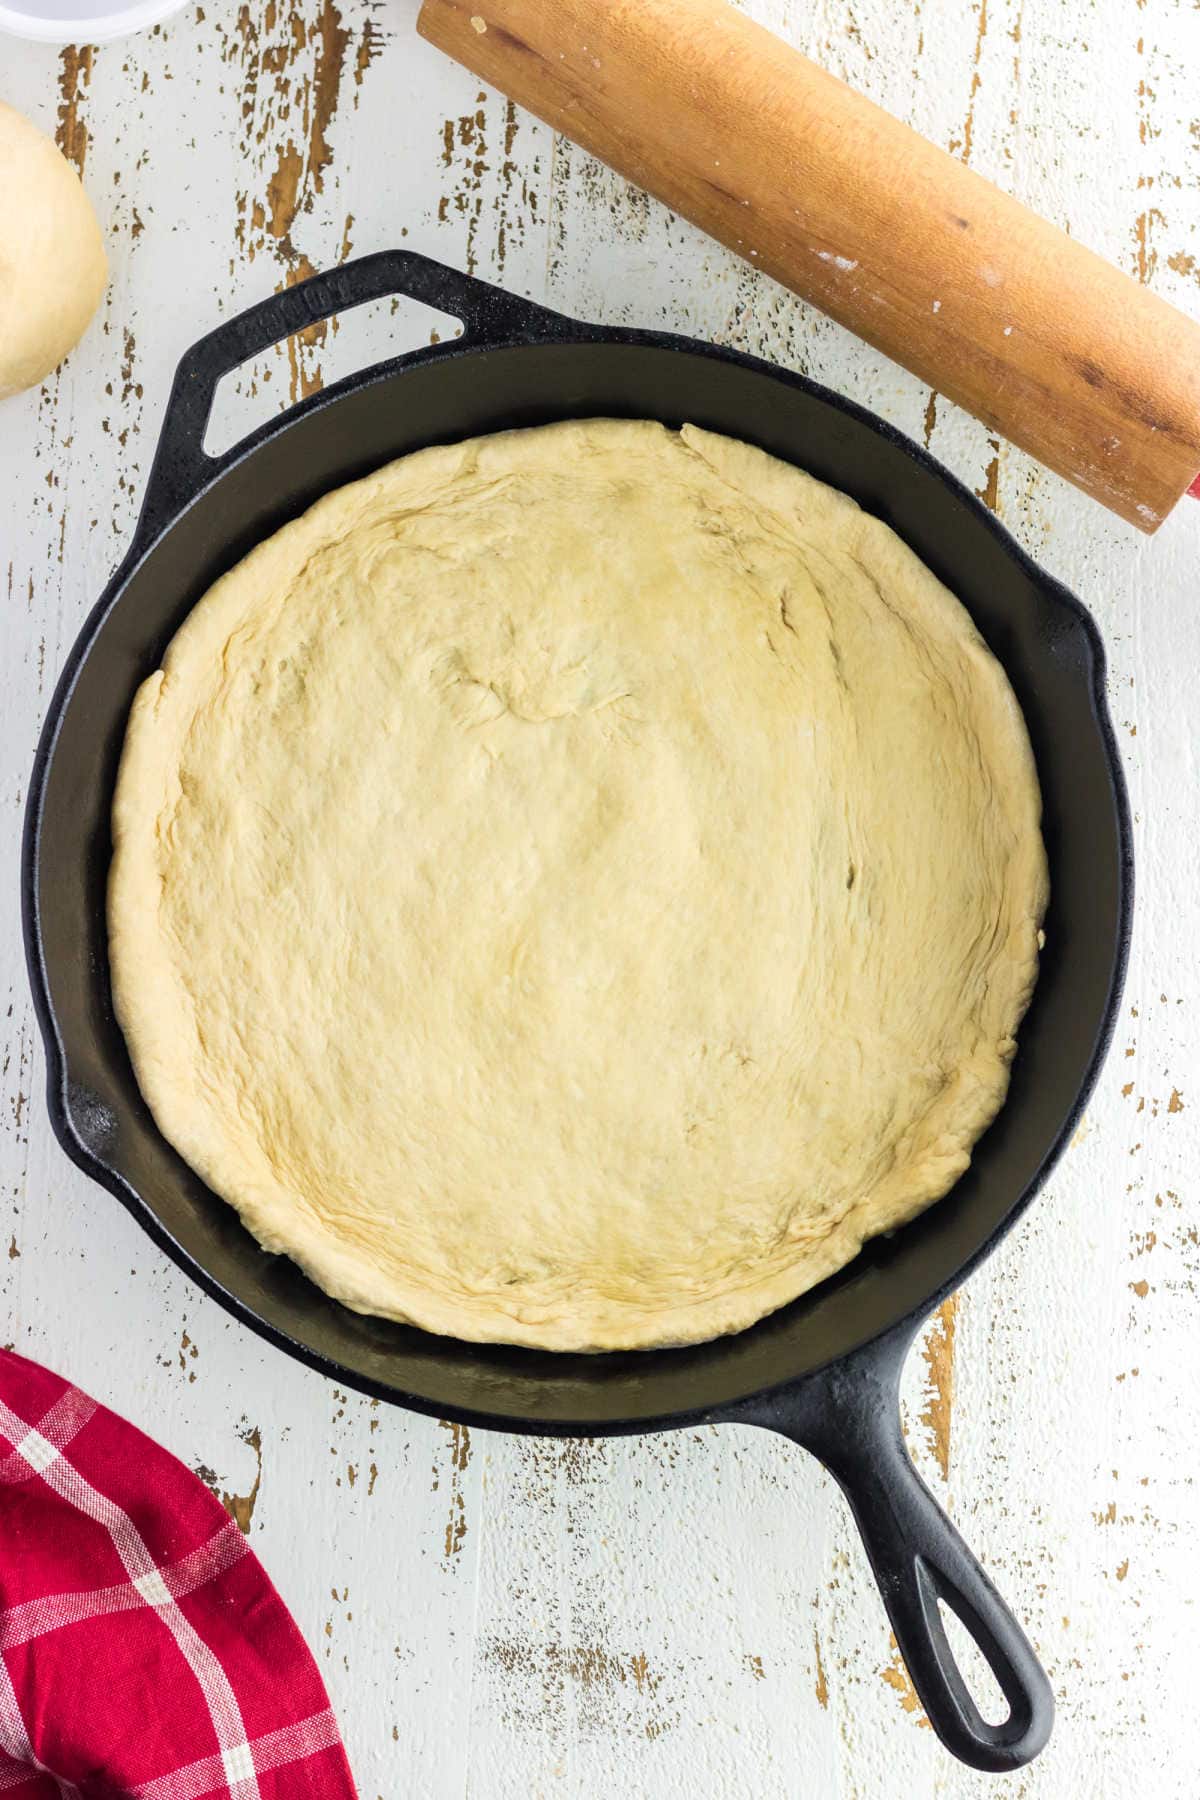 Overhead view of pizza dough in a cast iron skillet.